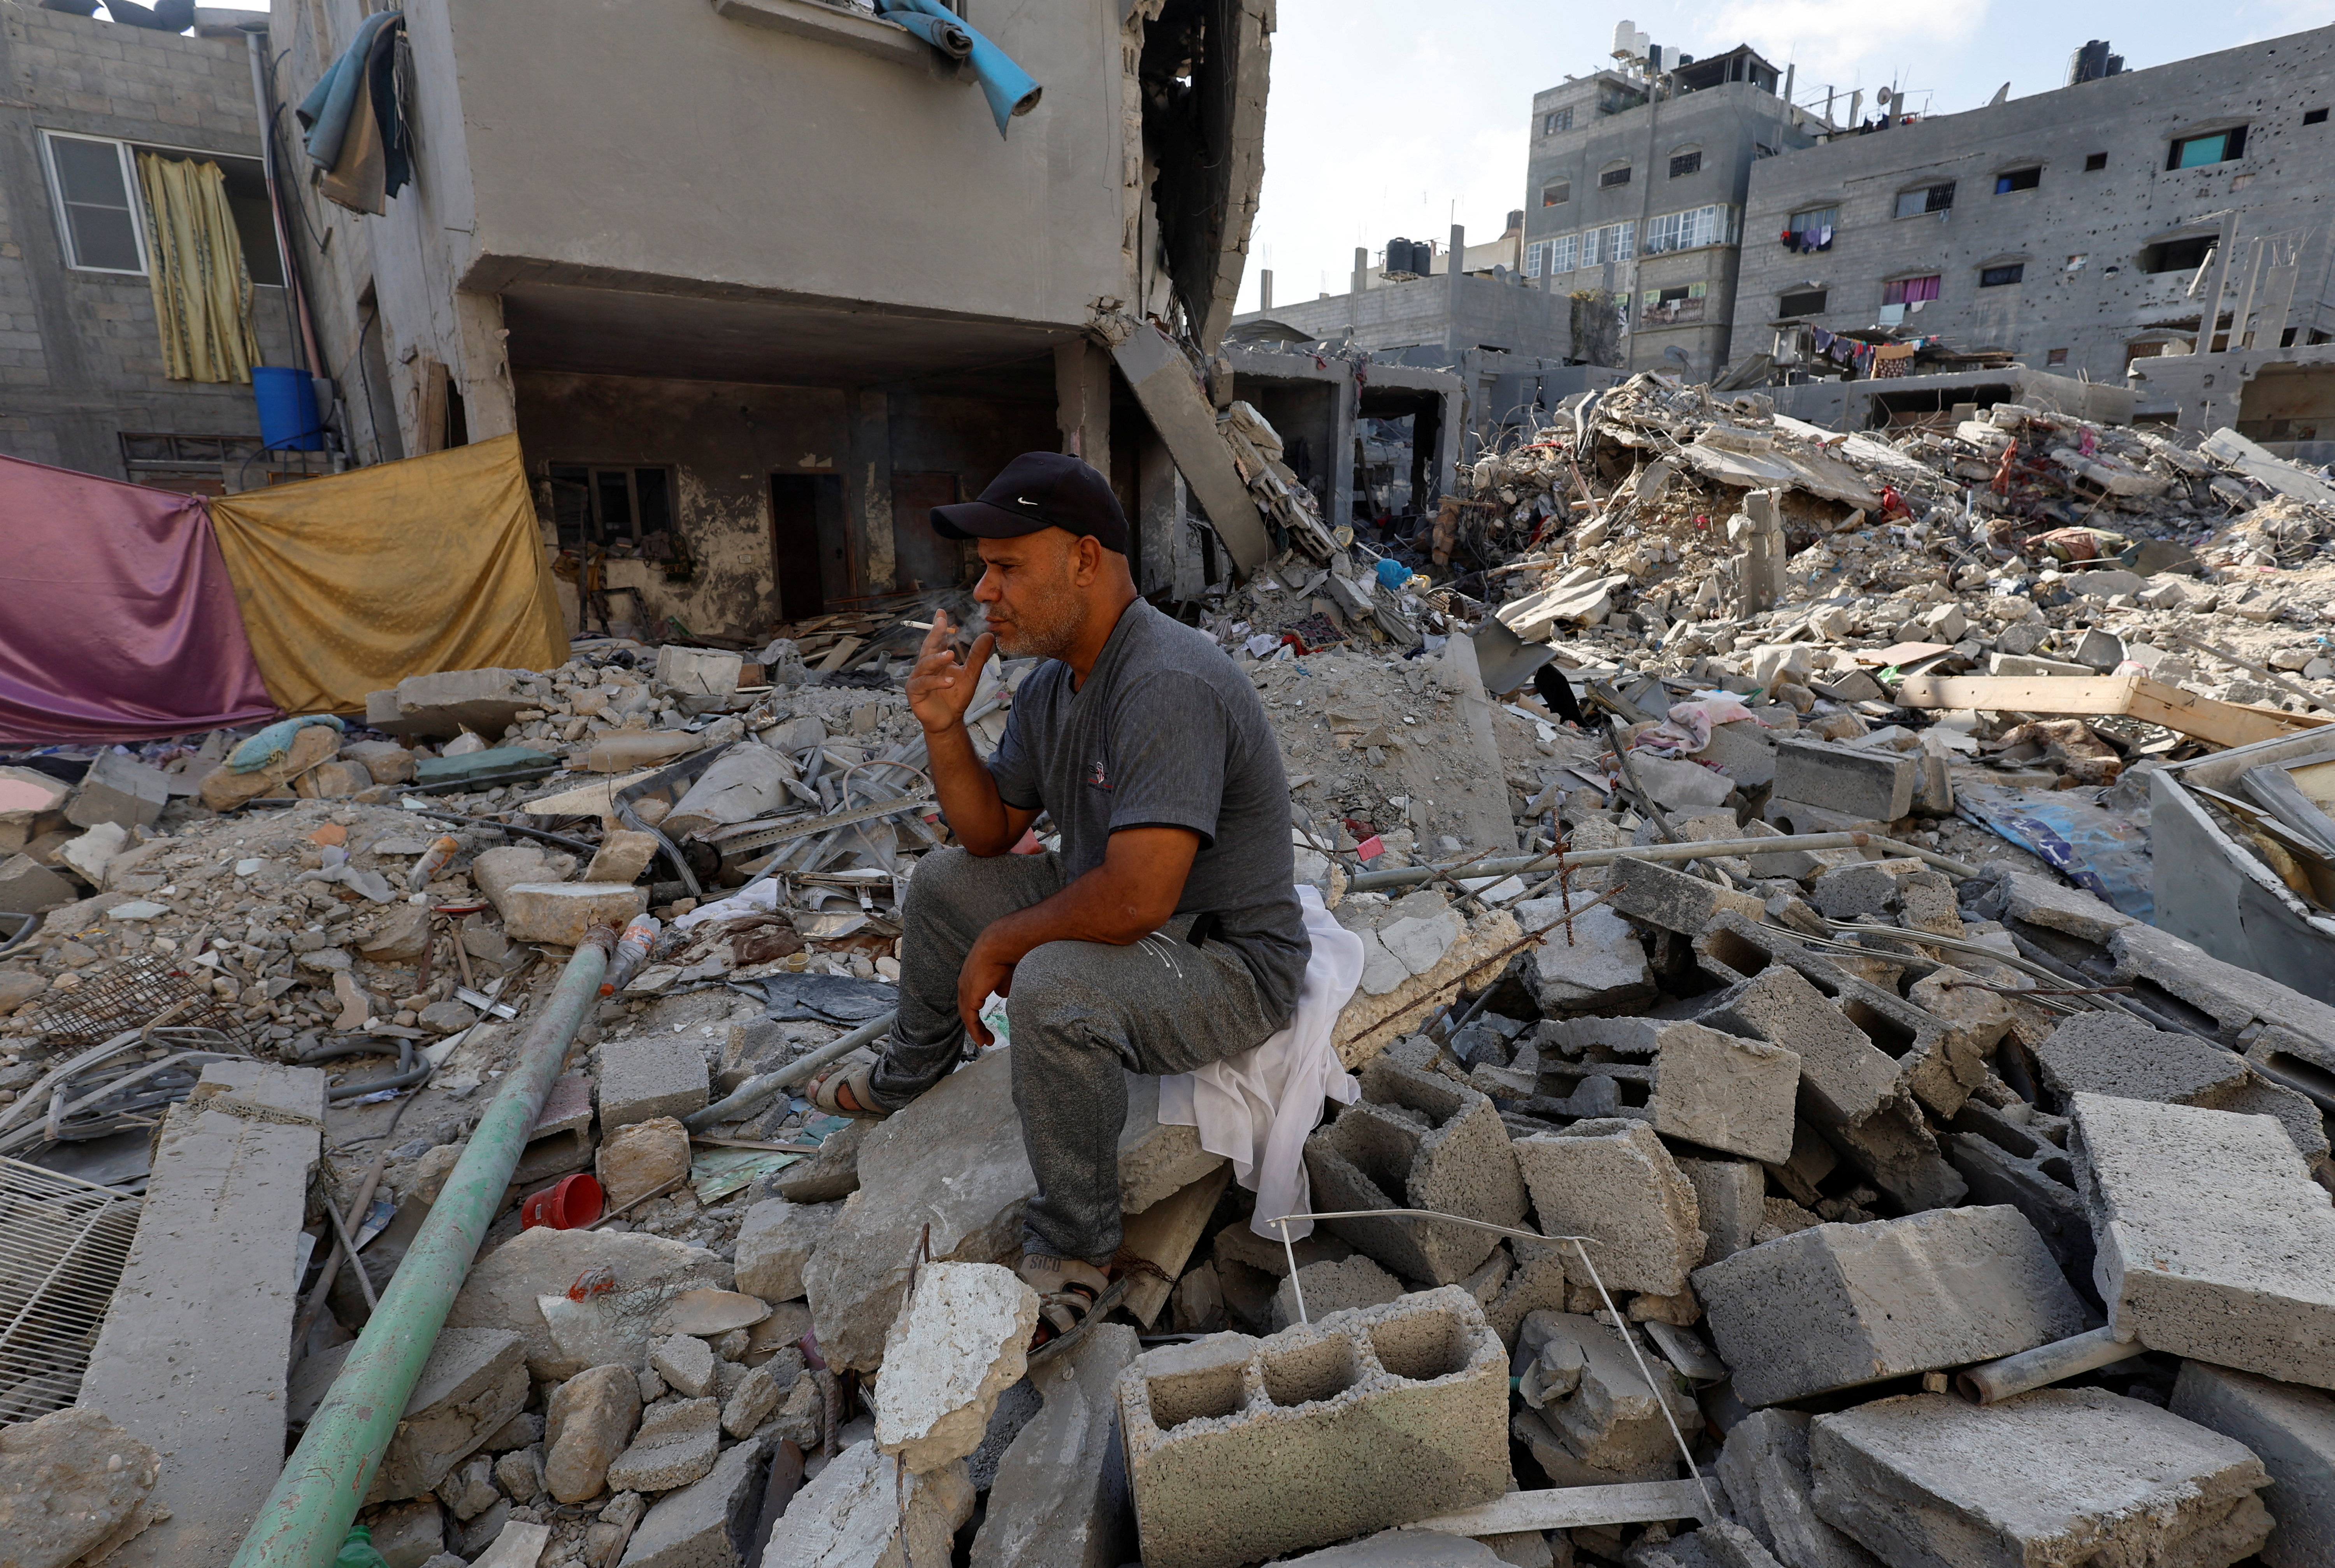 A Palestinian man sits among the debris of his home that was destroyed by an Israeli strike in Khan Younis in the southern Gaza. /Mohammed Salem/Reuters
